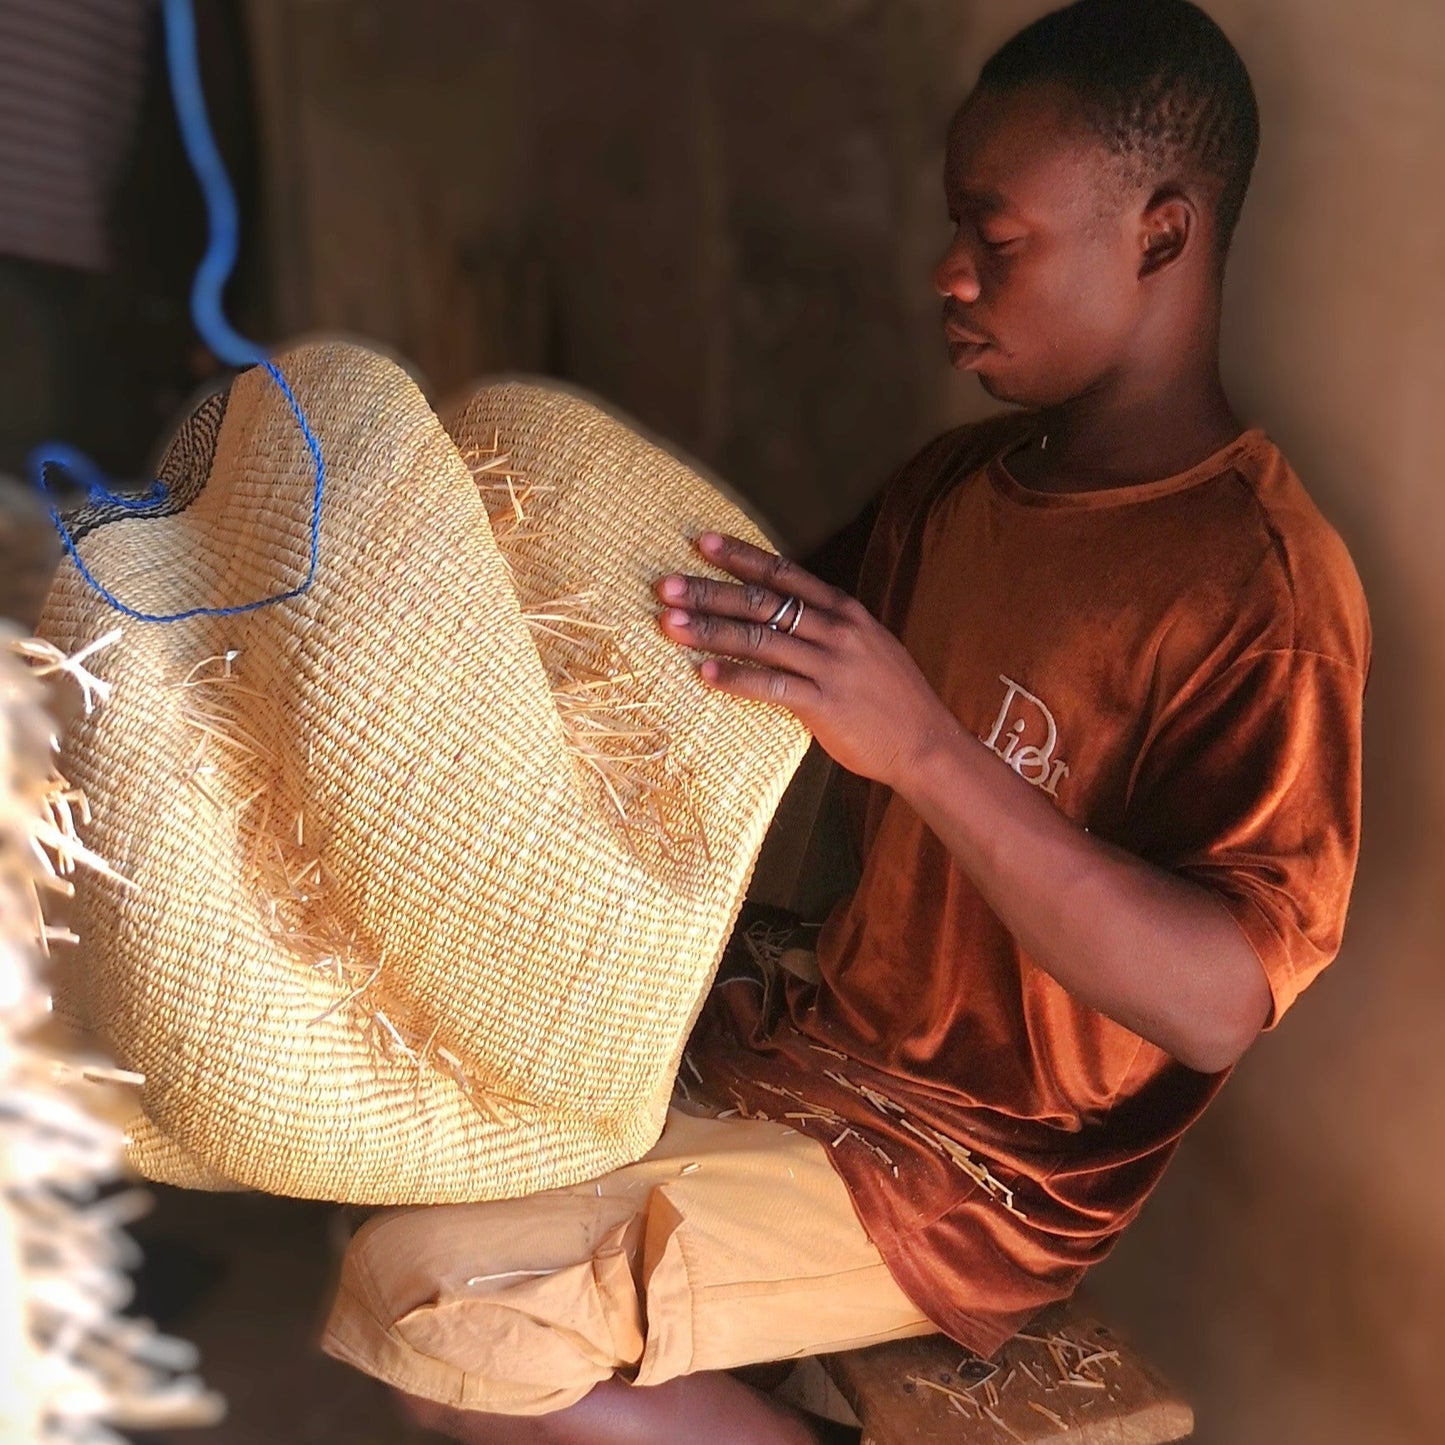 Lampshade braided in bamboo. Sustainable and Fair Trade from Cameroon